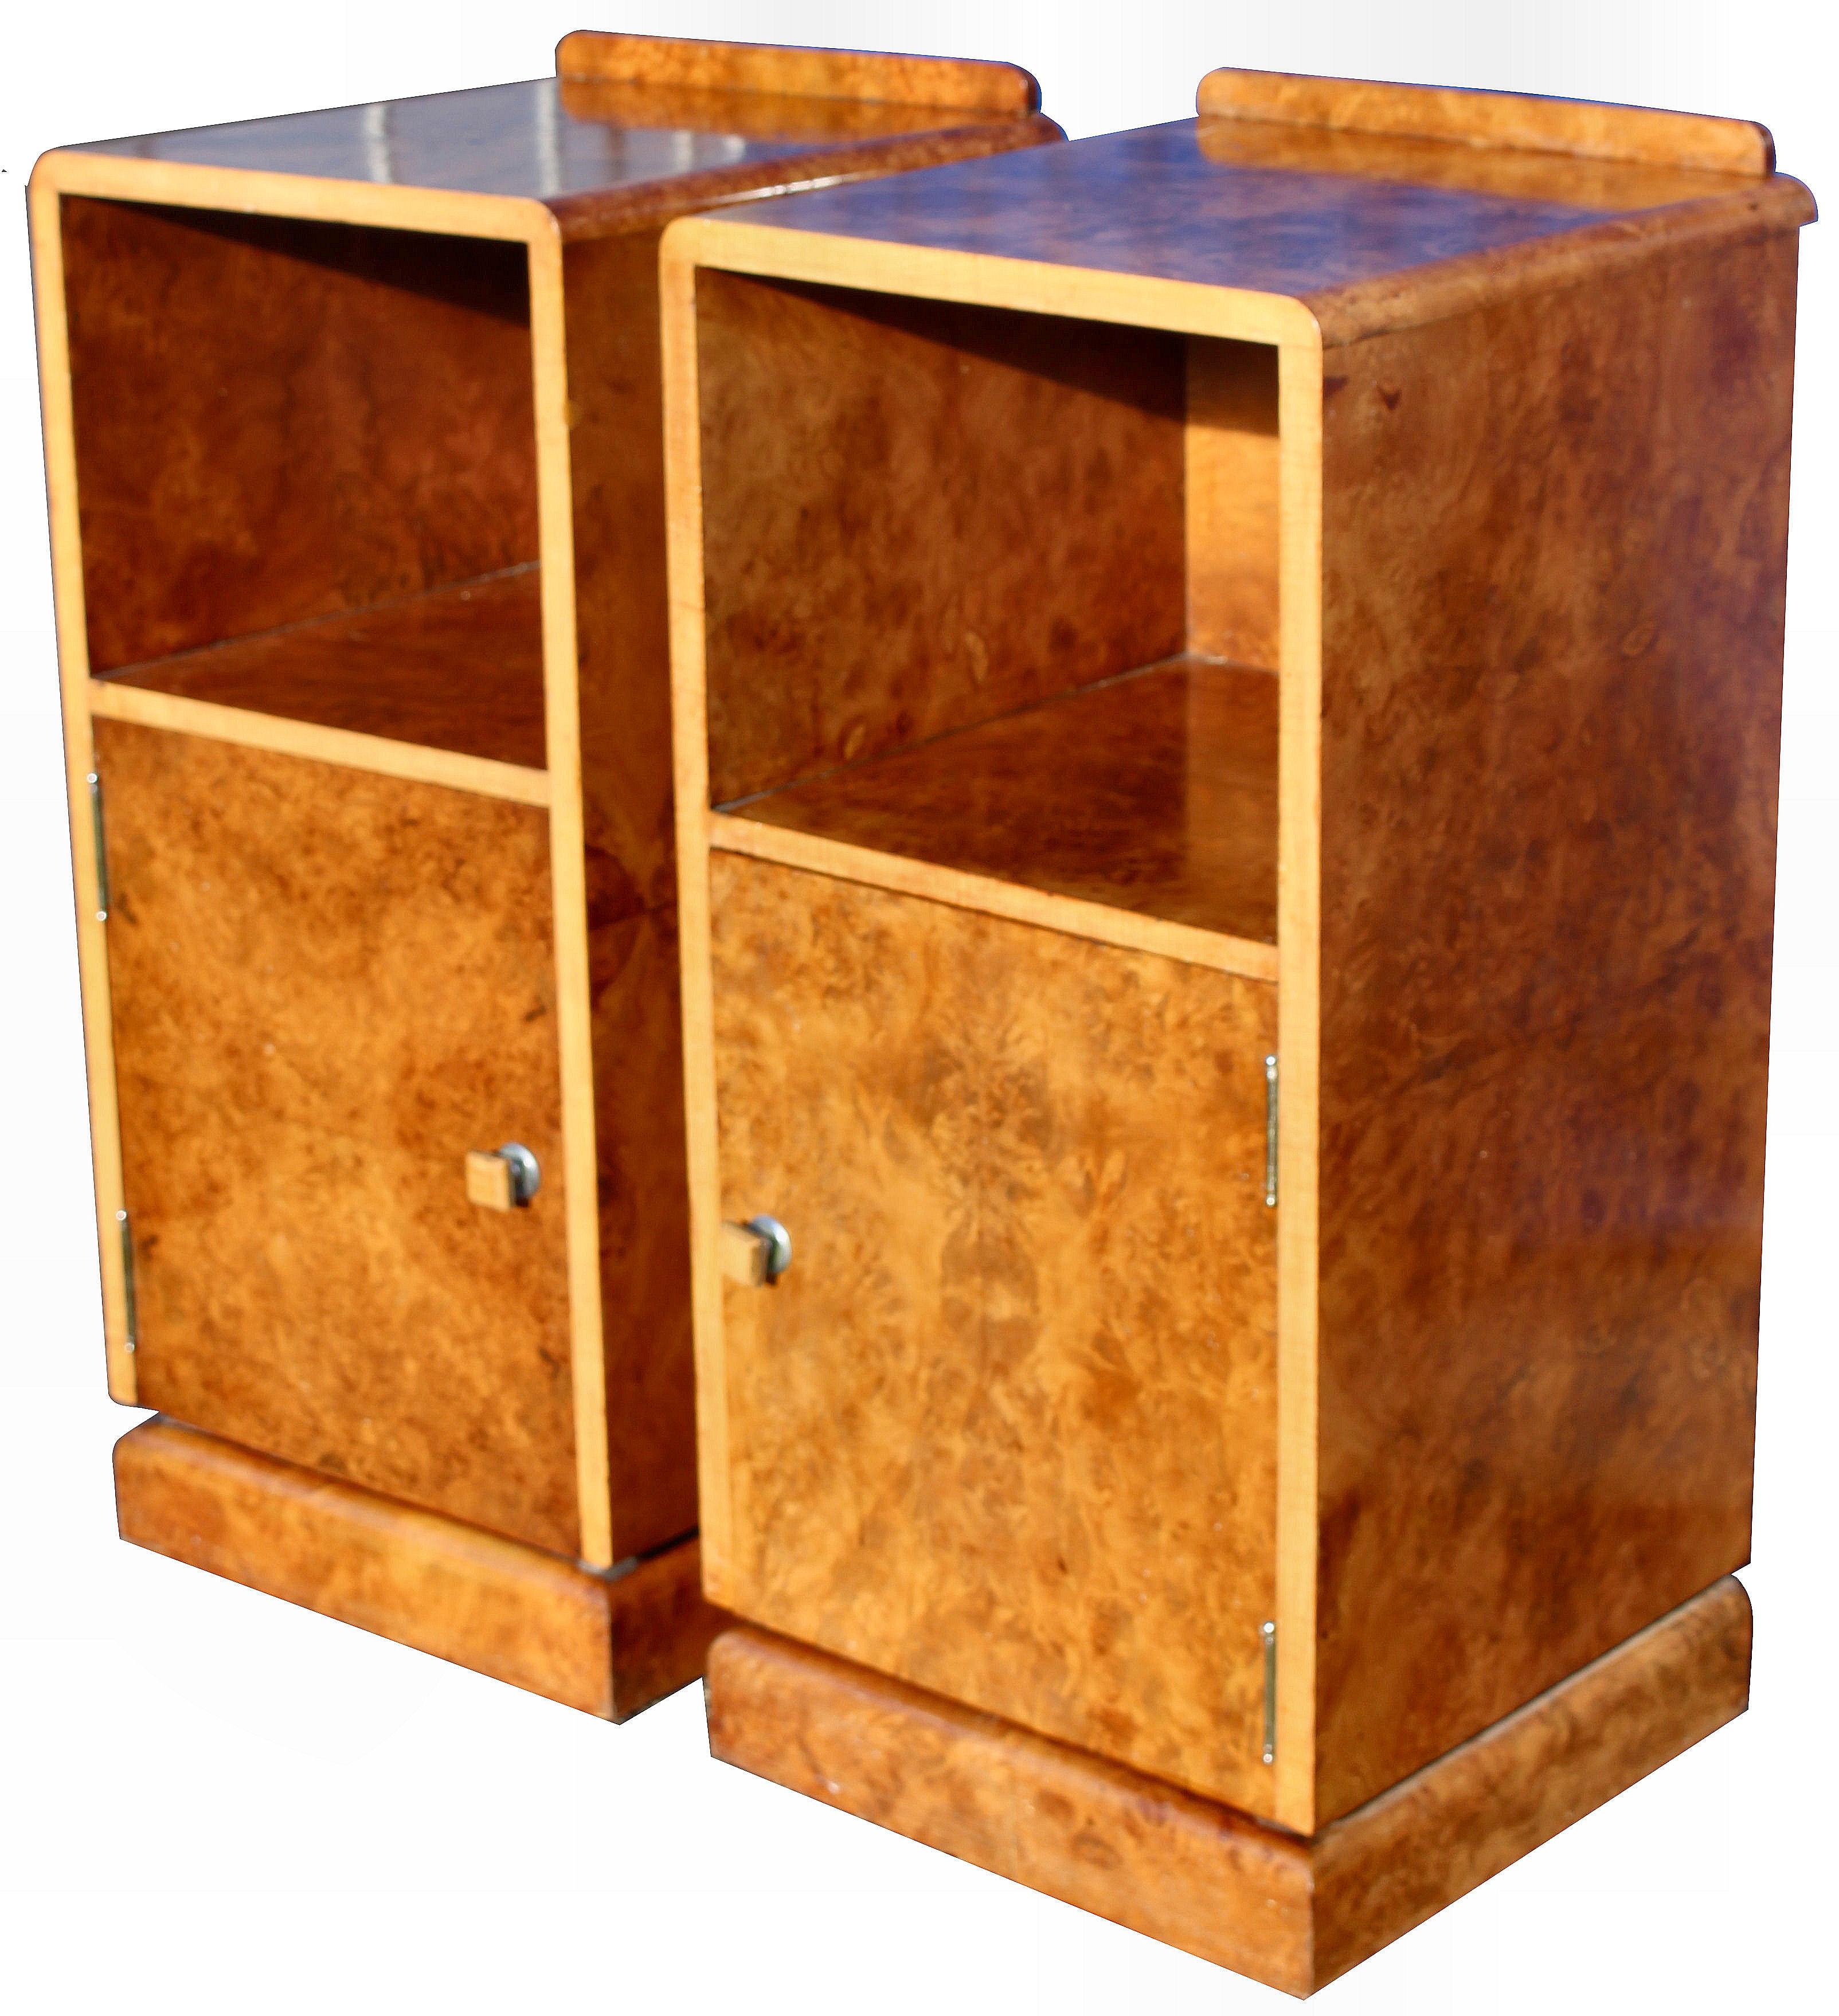 A very attractive 1930s Art Deco matching pair of highly figured walnut bedside tables. The veneers are particularly attractive and heavily figuring on these is something which is becoming harder to find so we were delighted to have found these.